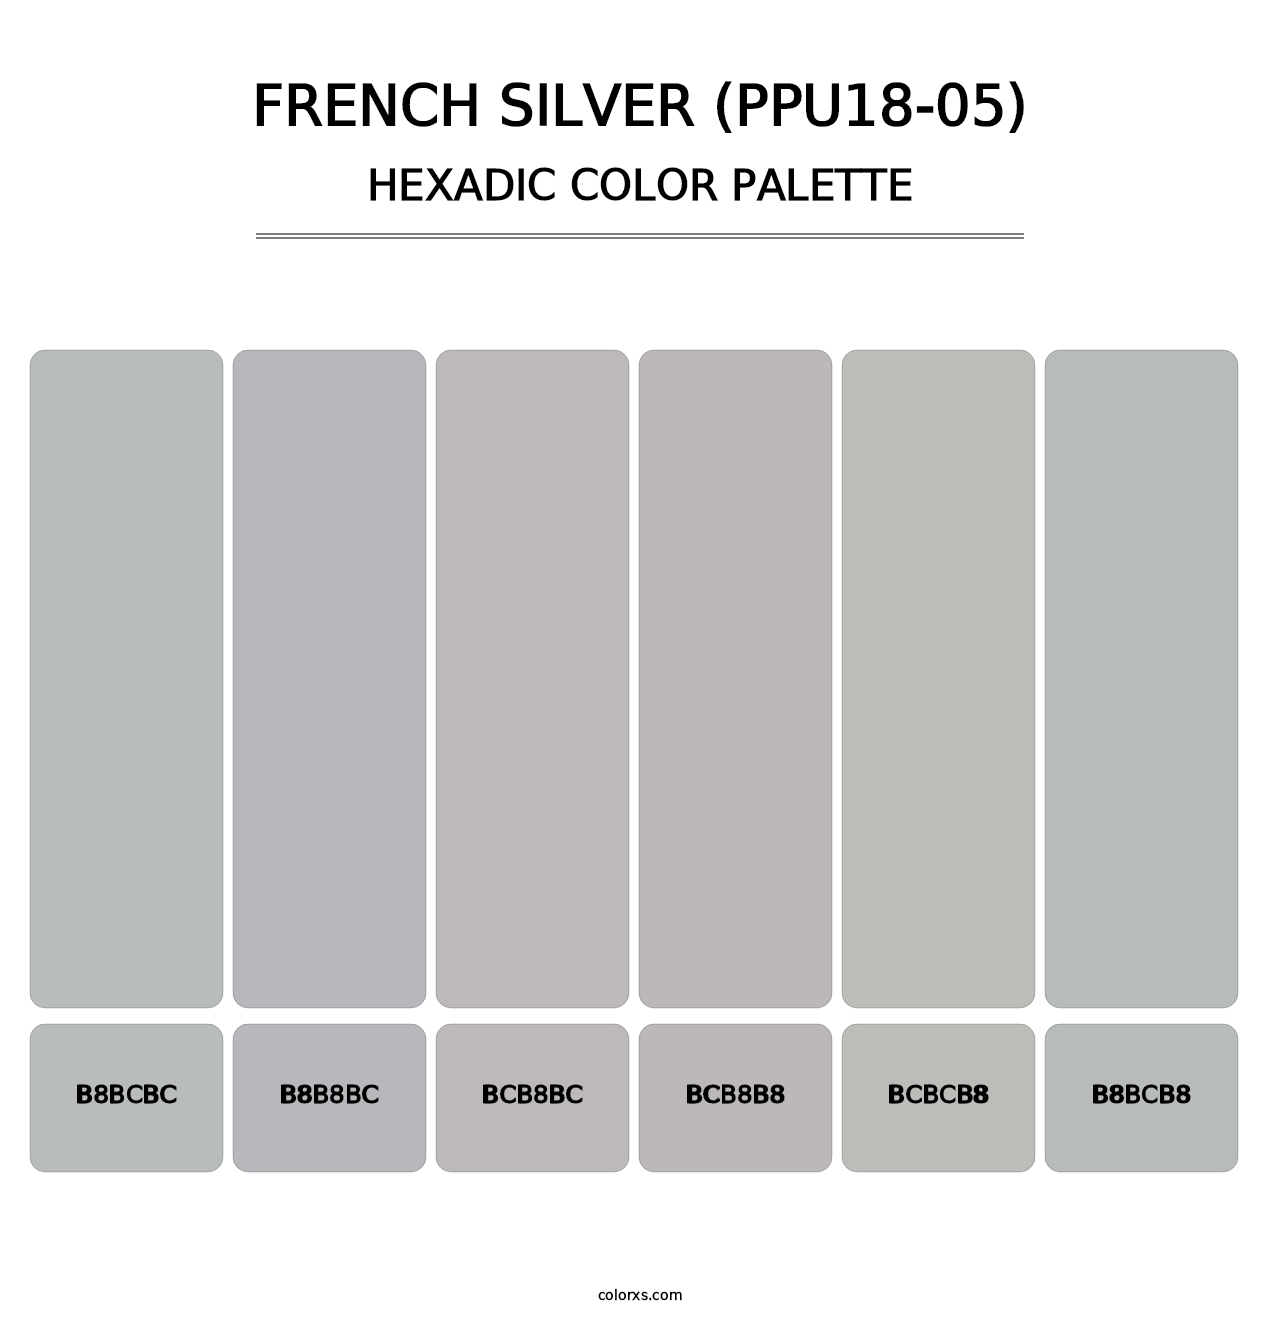 French Silver (PPU18-05) - Hexadic Color Palette